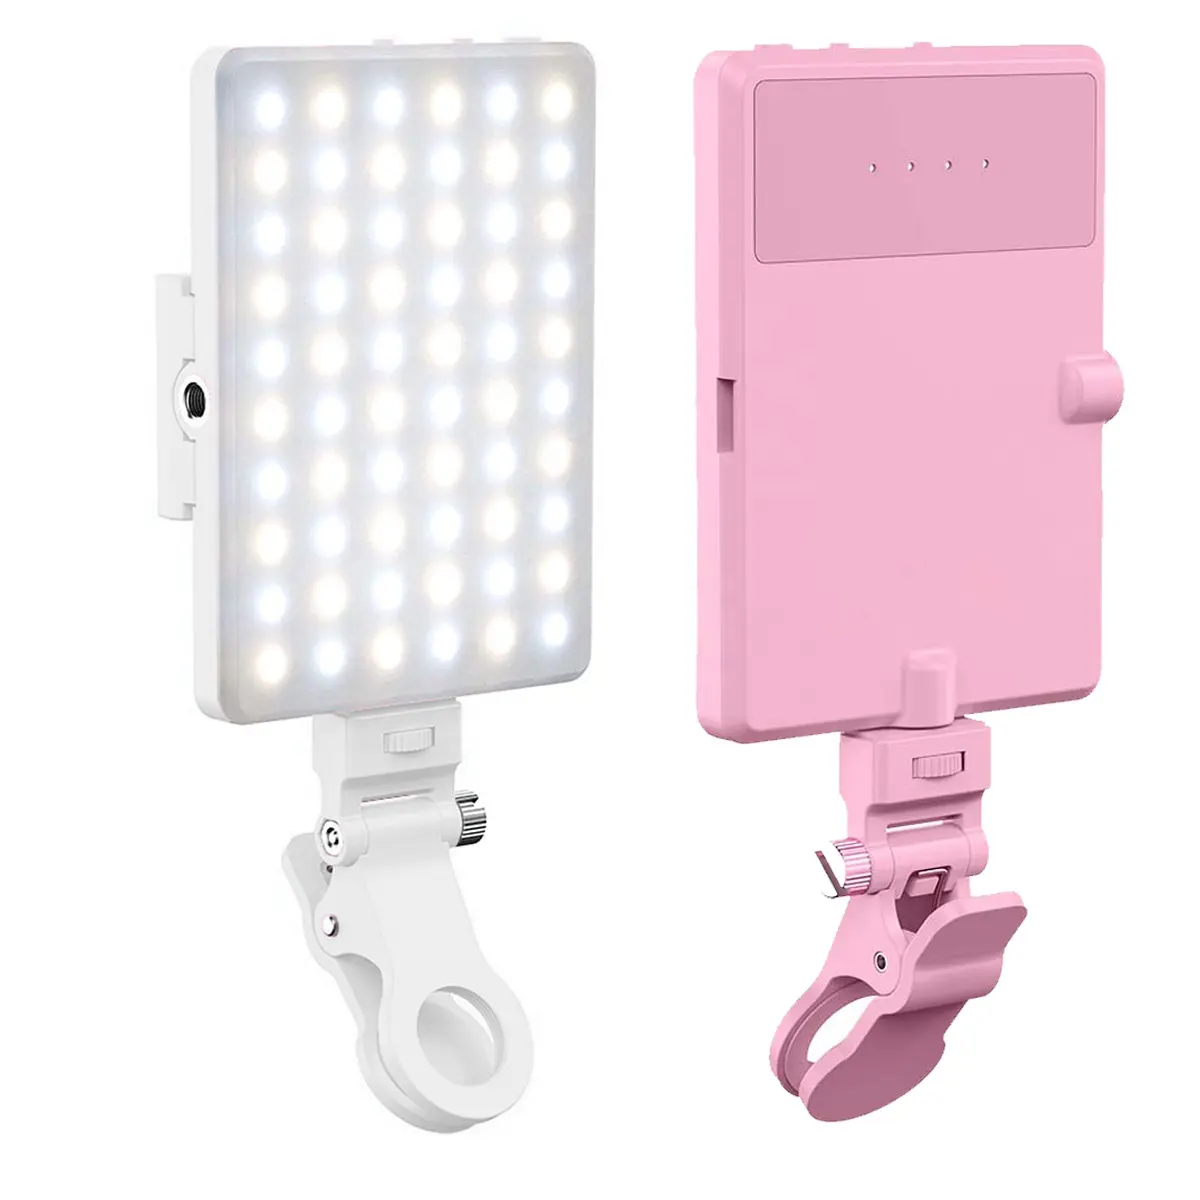 Fosoto Hot sales Mini Rechargeable Selfie Led Video Camera Lights Mobile Phone Cell Phone Fill Light For Computer Camera Light